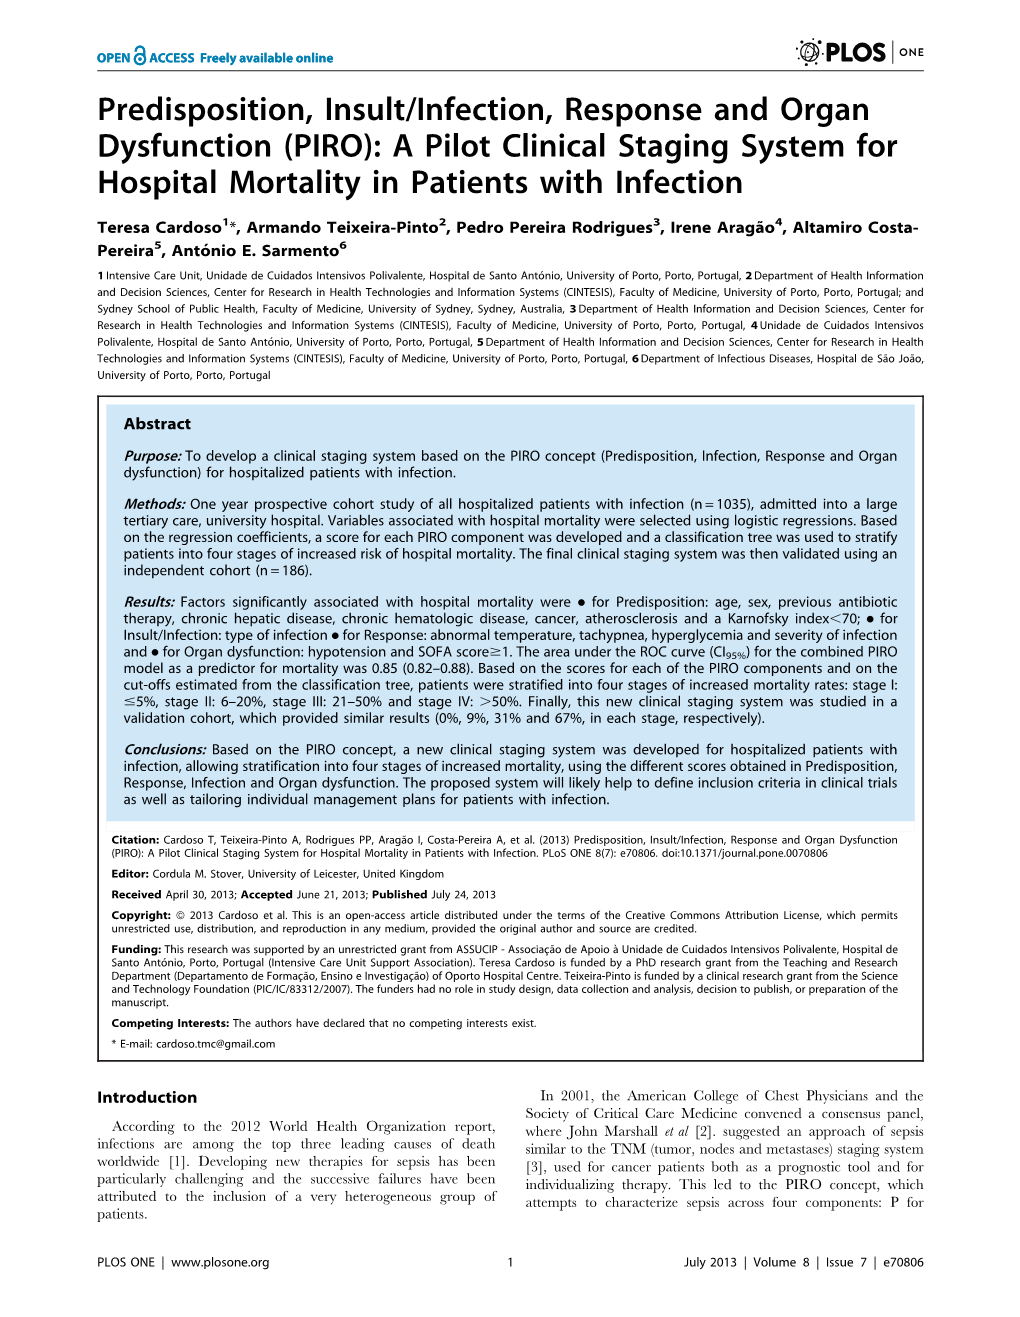 Predisposition, Insult/Infection, Response and Organ Dysfunction (PIRO): a Pilot Clinical Staging System for Hospital Mortality in Patients with Infection